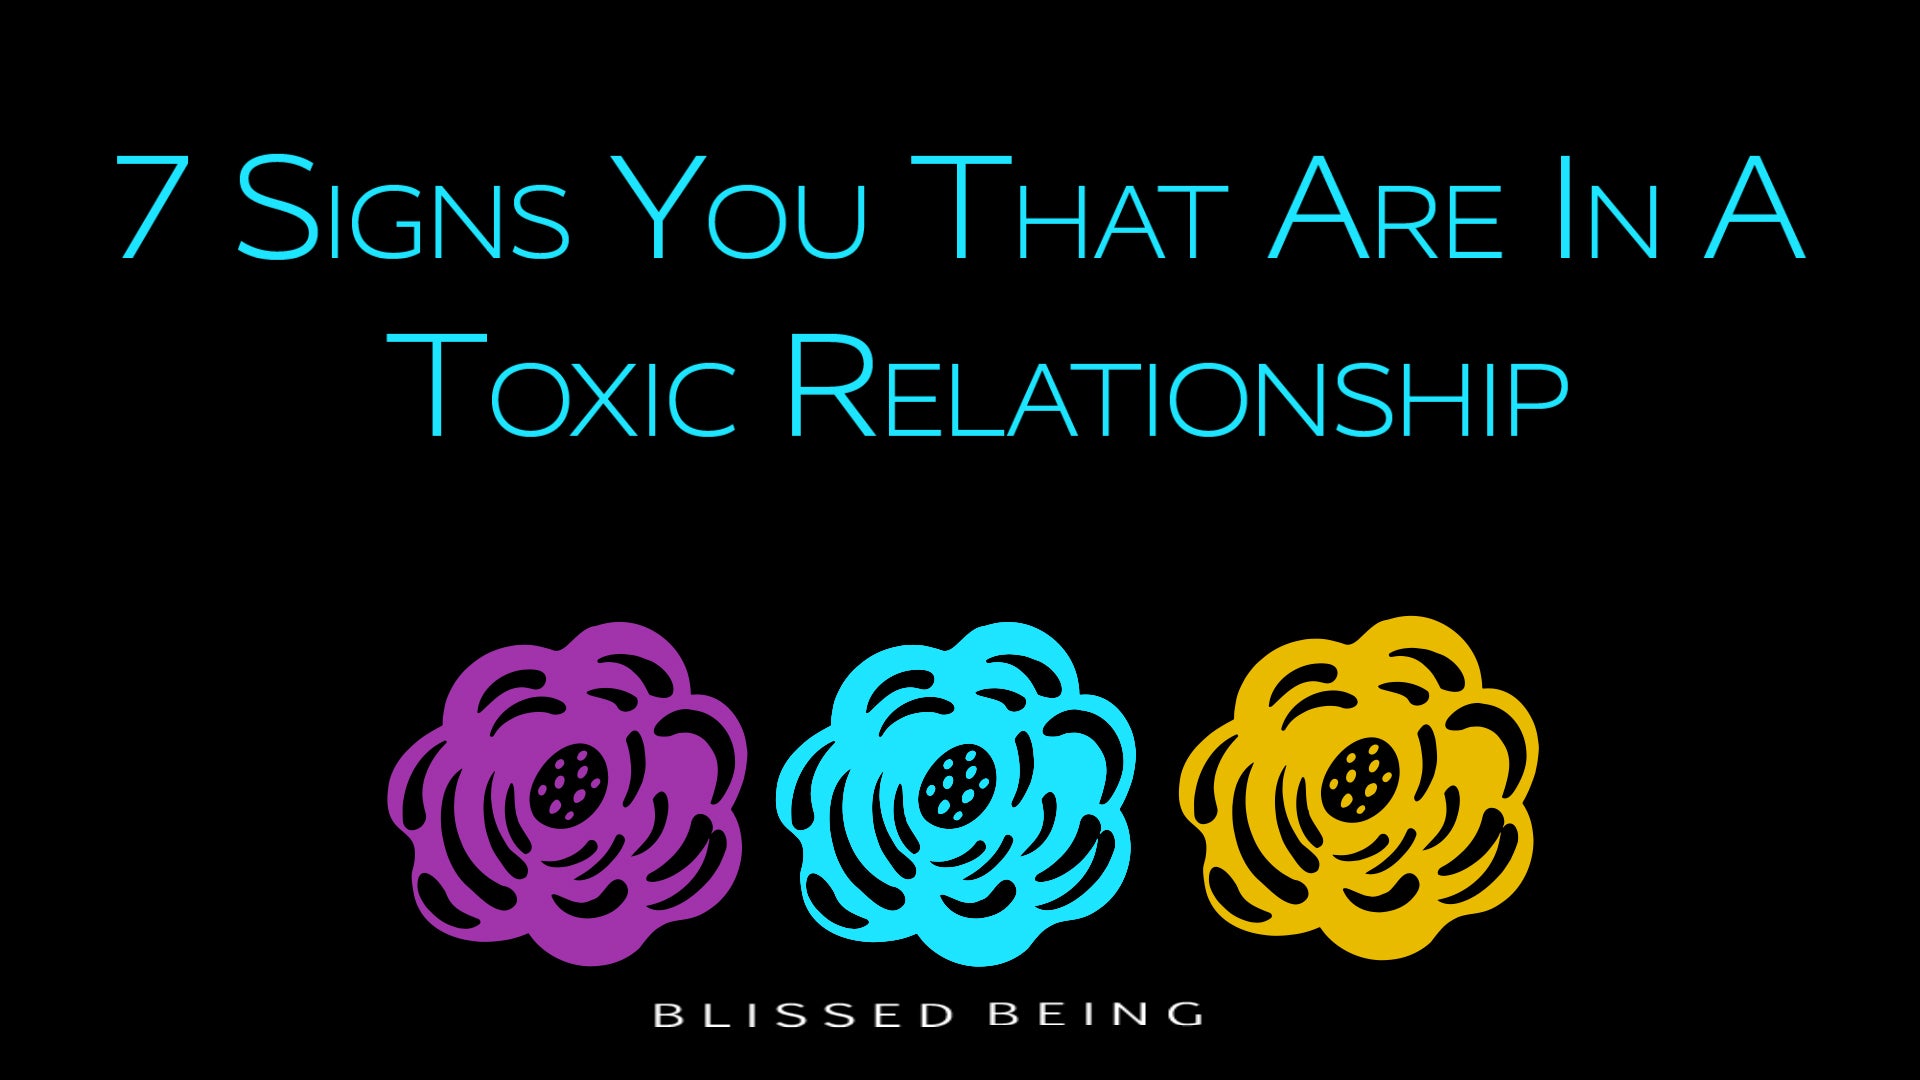 7 Signs That You Are In a Toxic Relationship